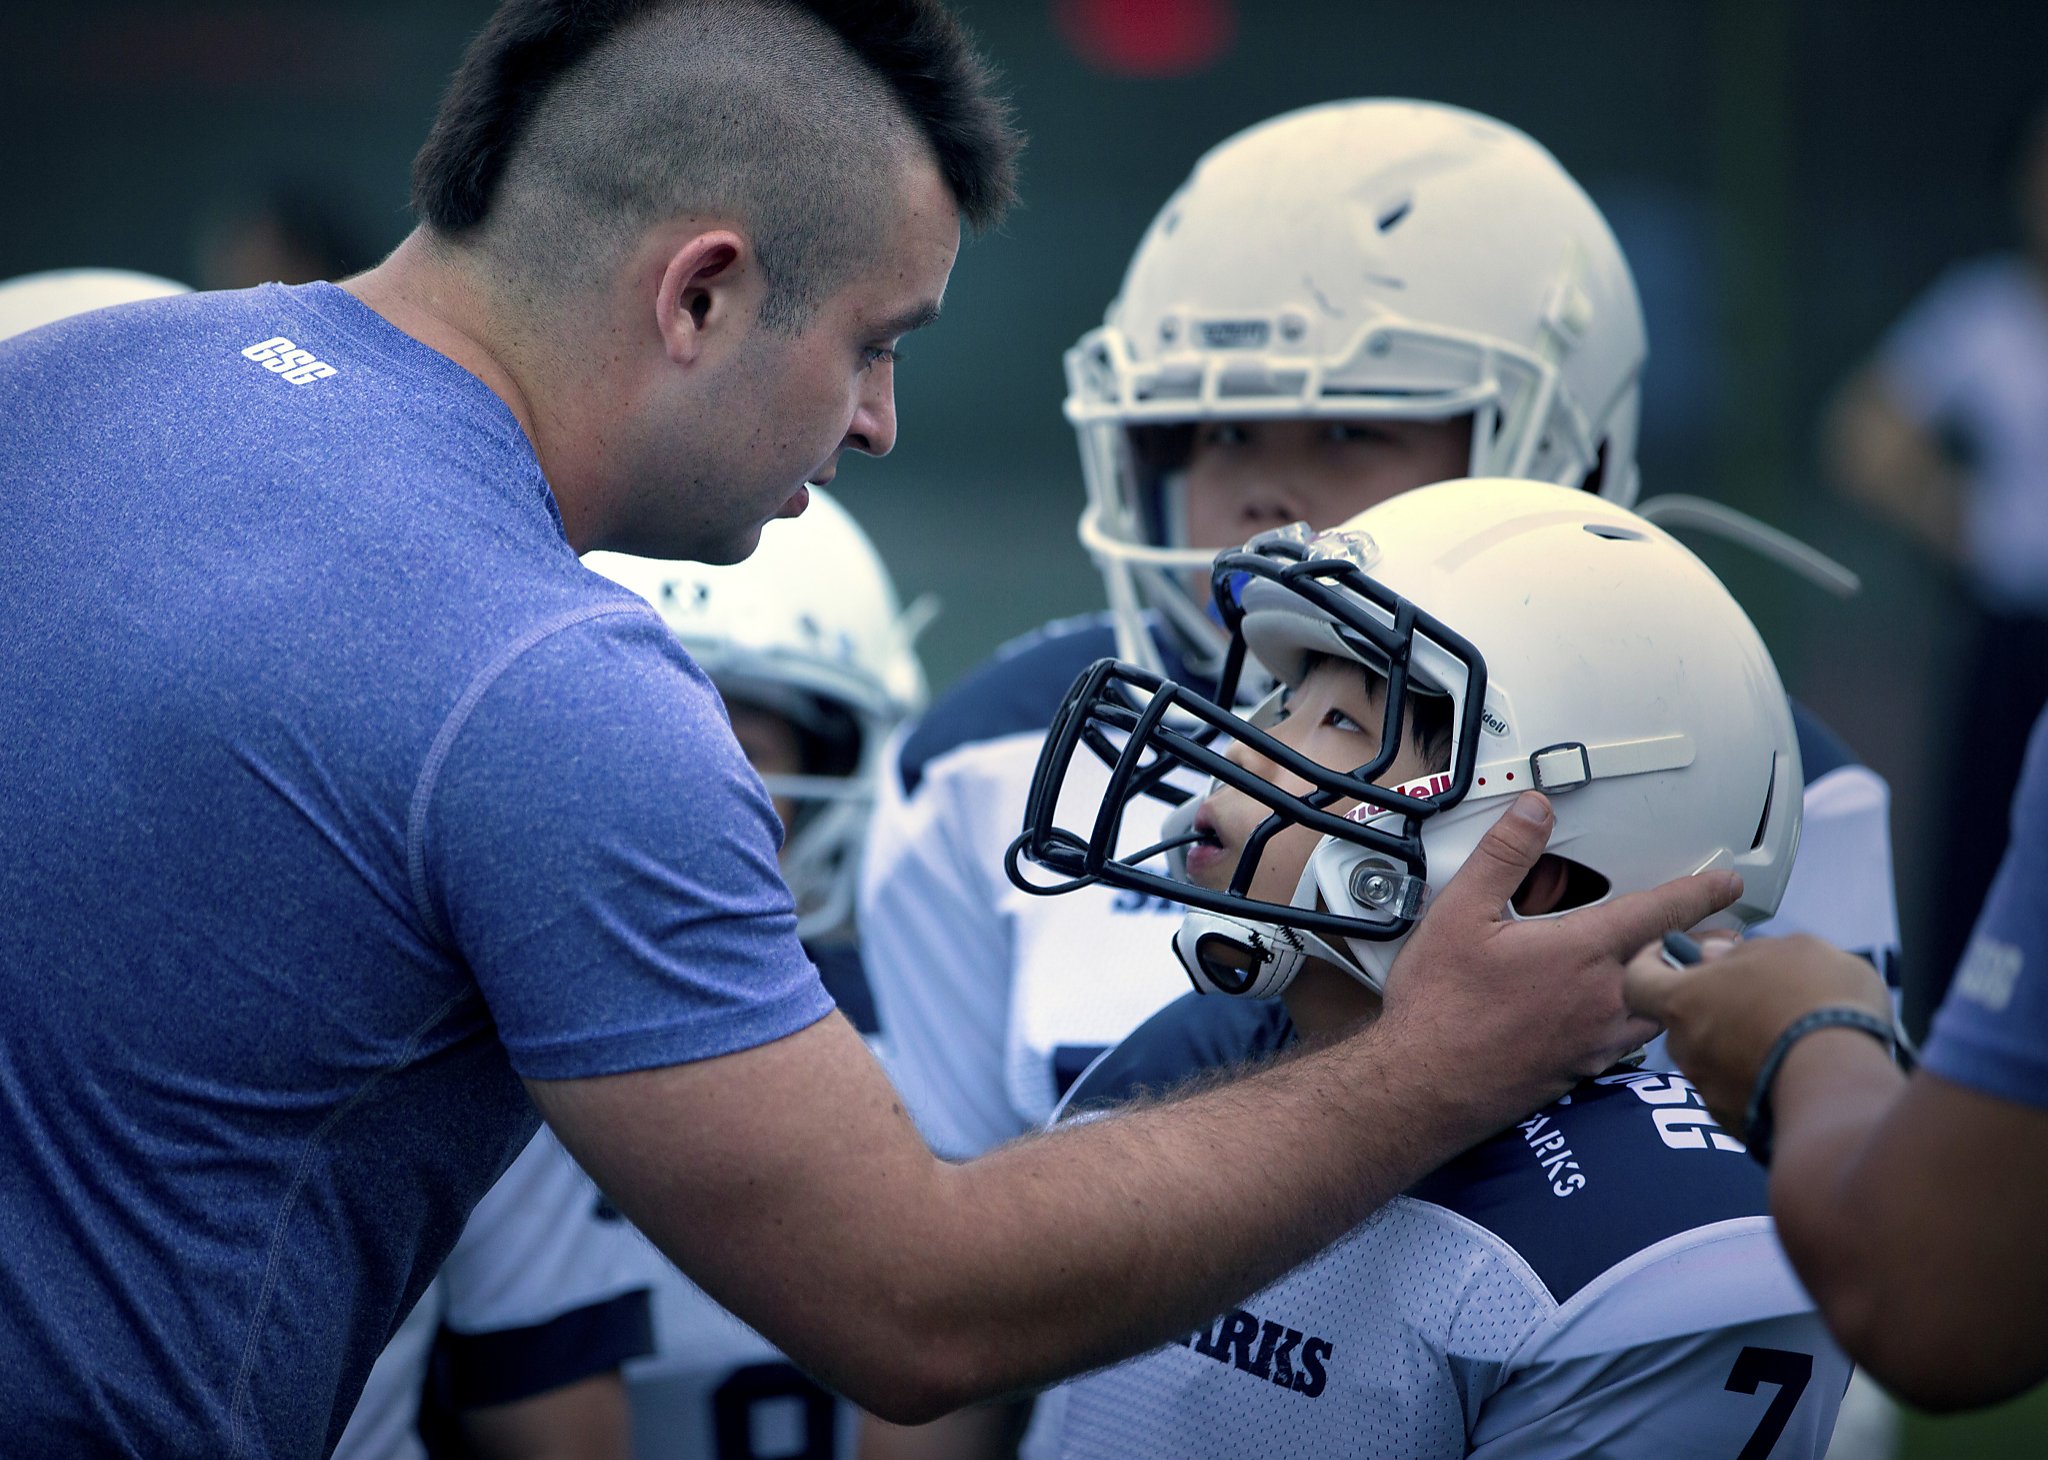 Tackle football before age 12 could result in earlier CTE symptoms